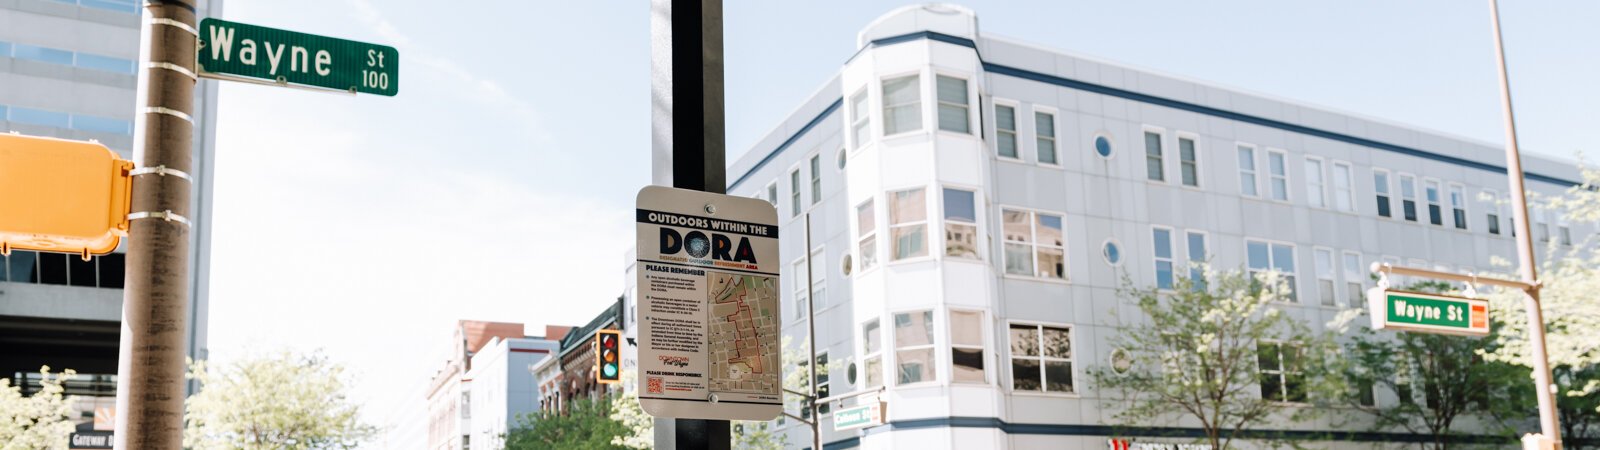 A sign at Wayne Street and Calhoun Street in downtown Fort Wayne reminds people of the rules within the new DORA (Designated Outdoor Refreshment Area).